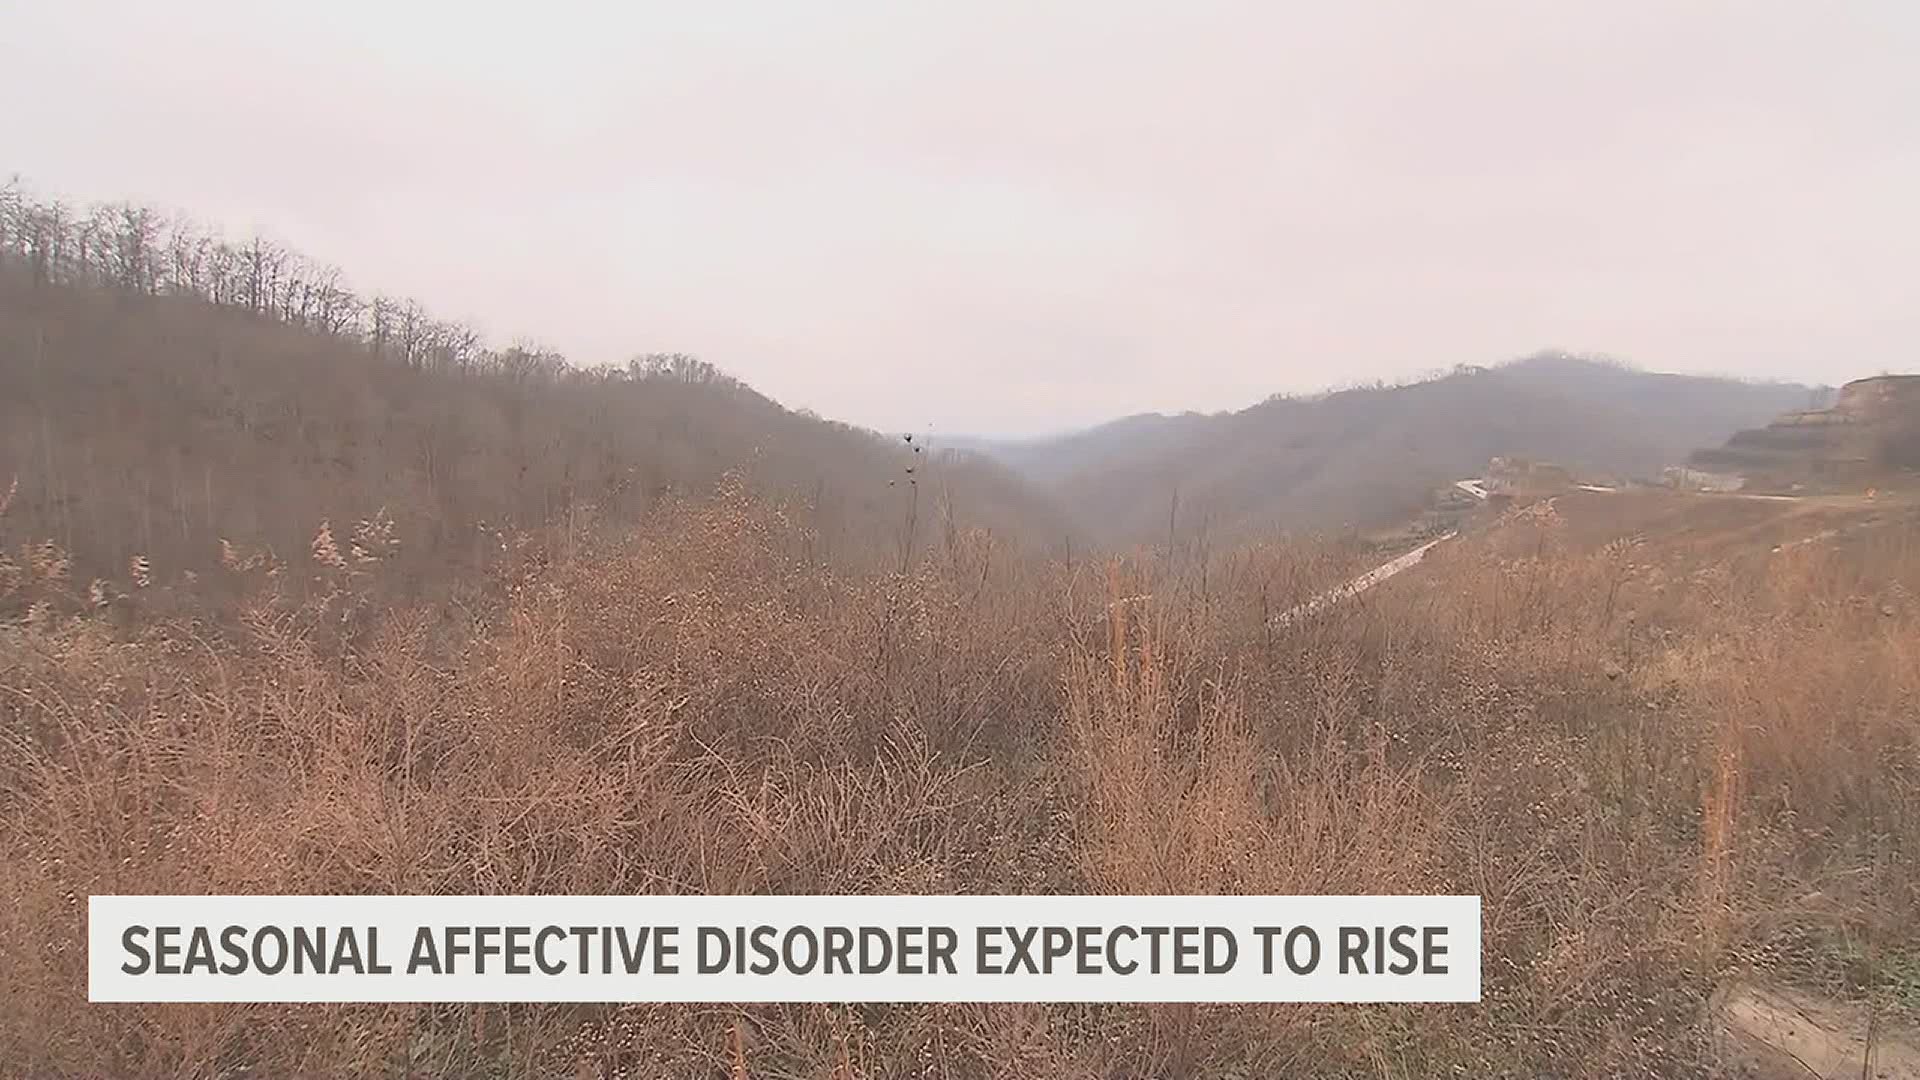 Seasonal Affective Disorder Expected to Rise